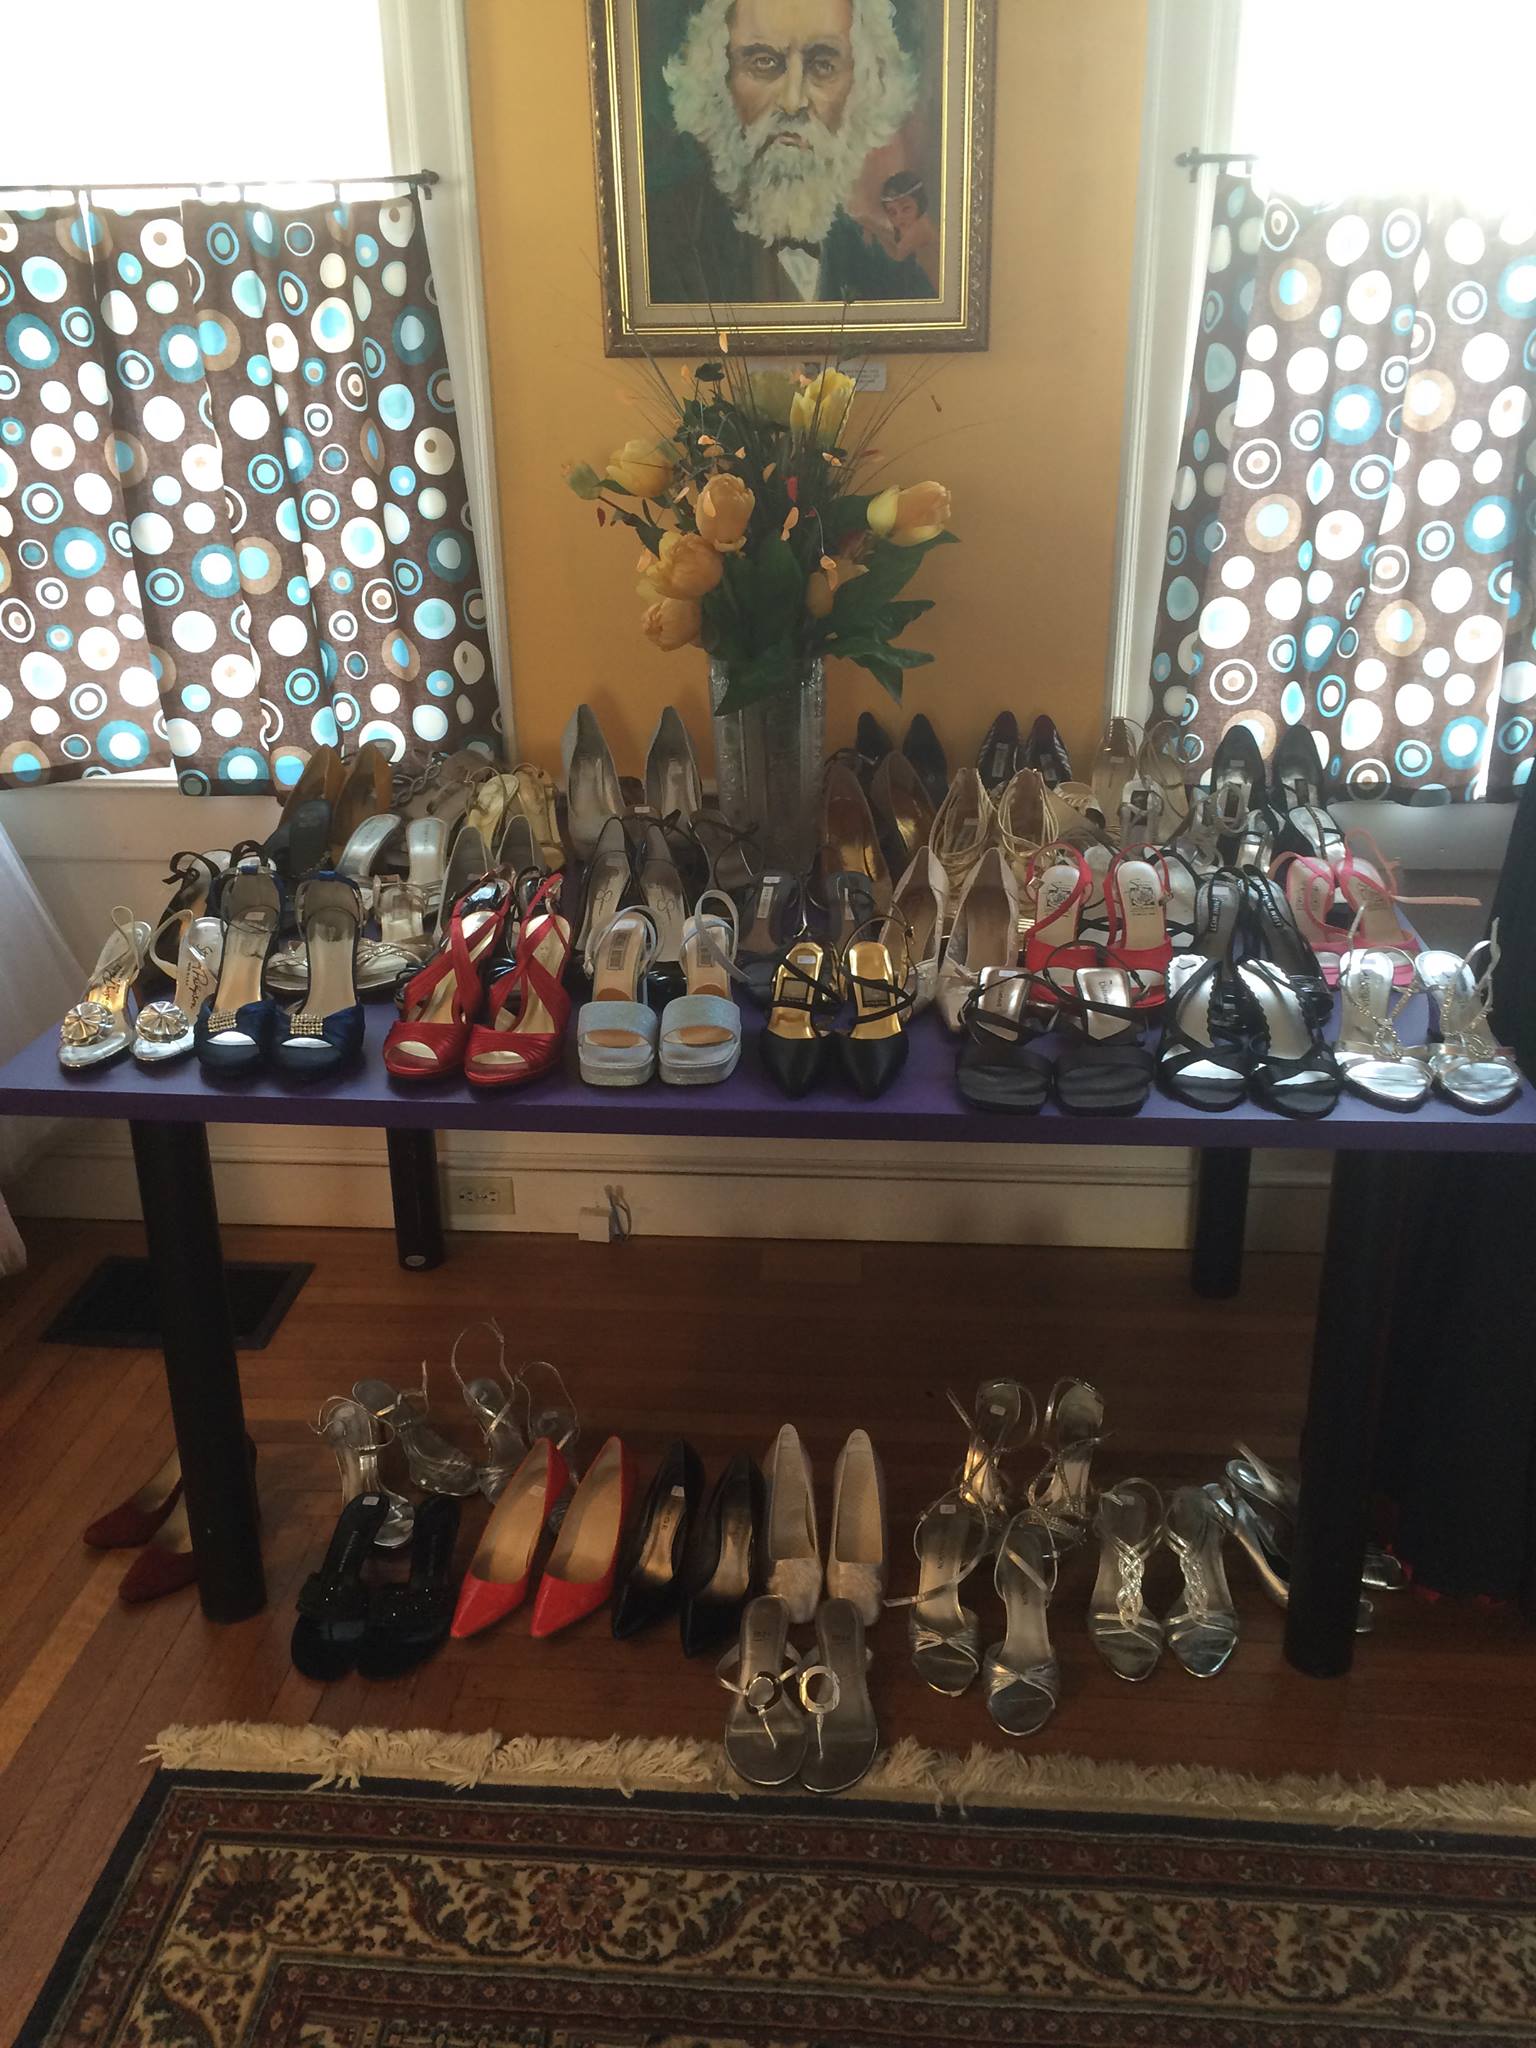 Tammi’s Closet stocks not only beautiful dresses, but shoes, bags and accessories to make a girl’s prom ensemble complete for her special night.